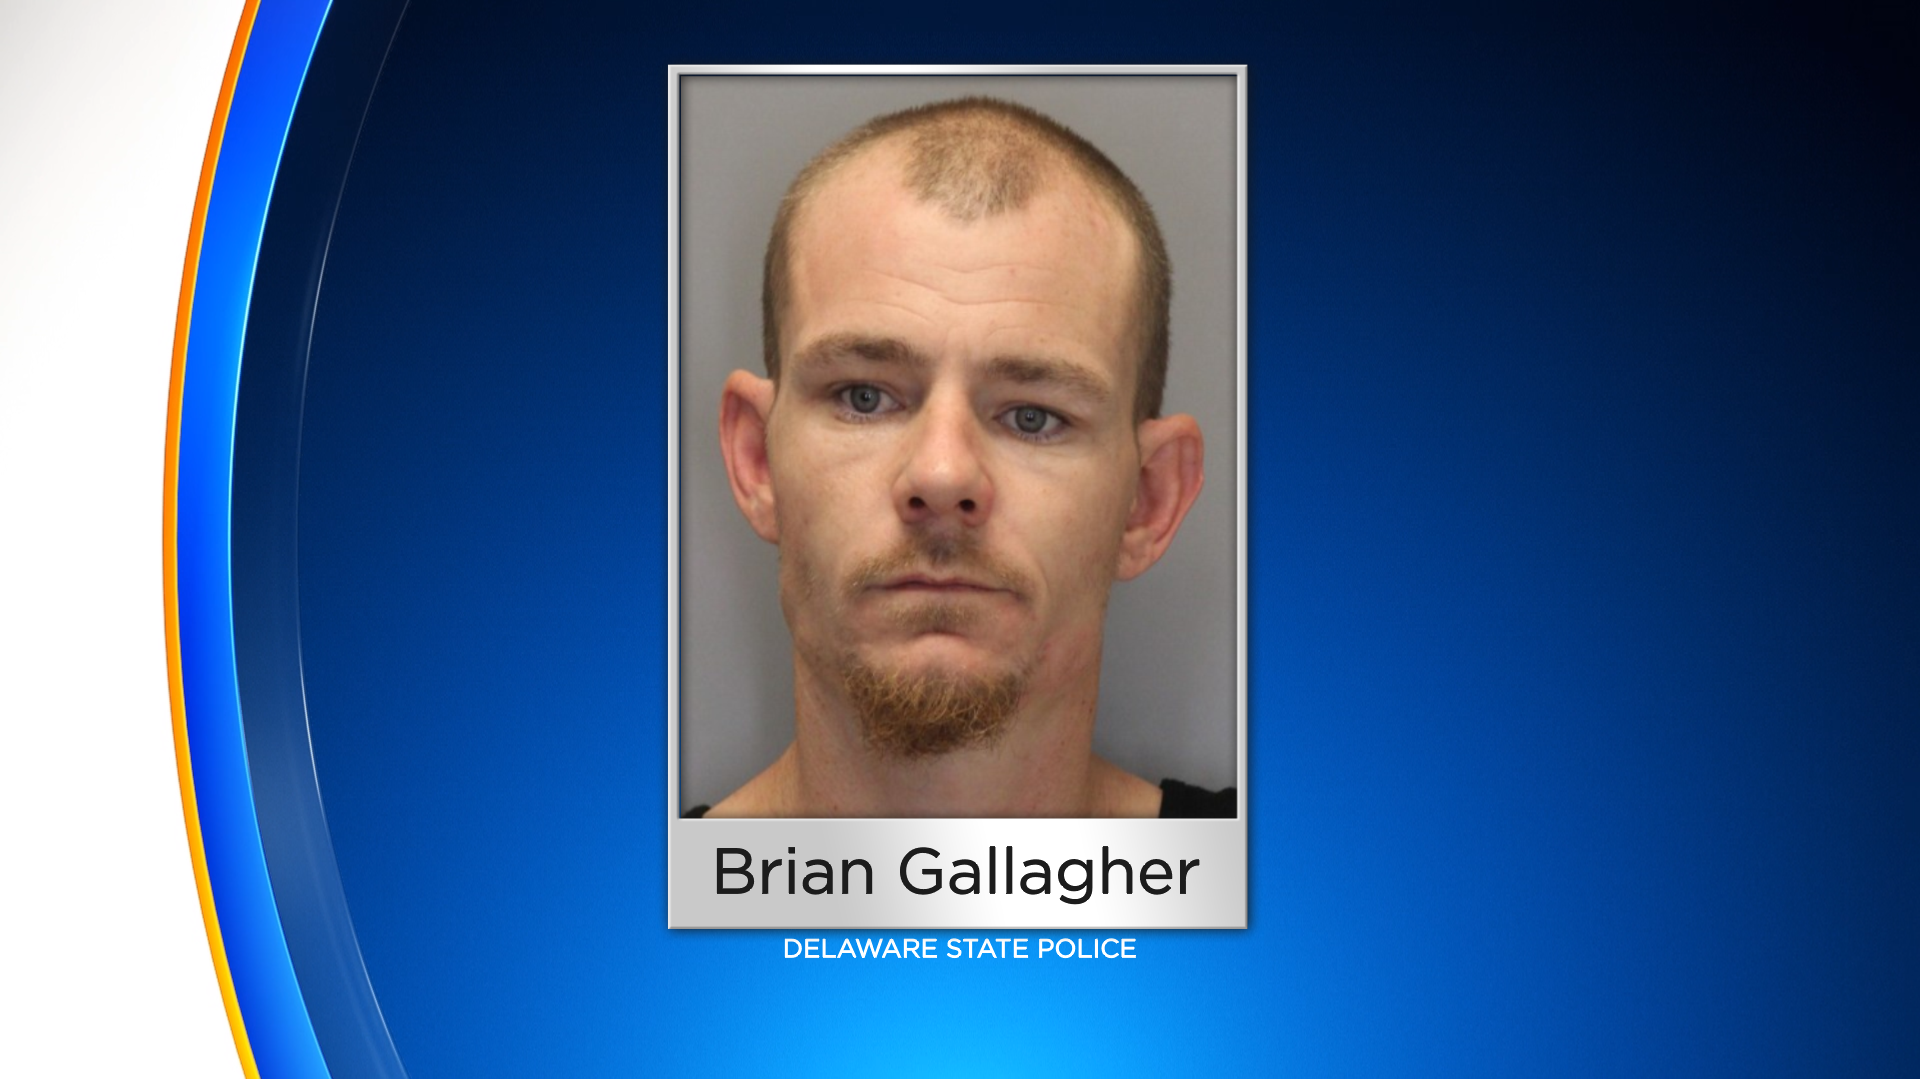 New Castle County Man, Brian Gallagher, Arrested In Connection With Multiple Burglaries, Police Say